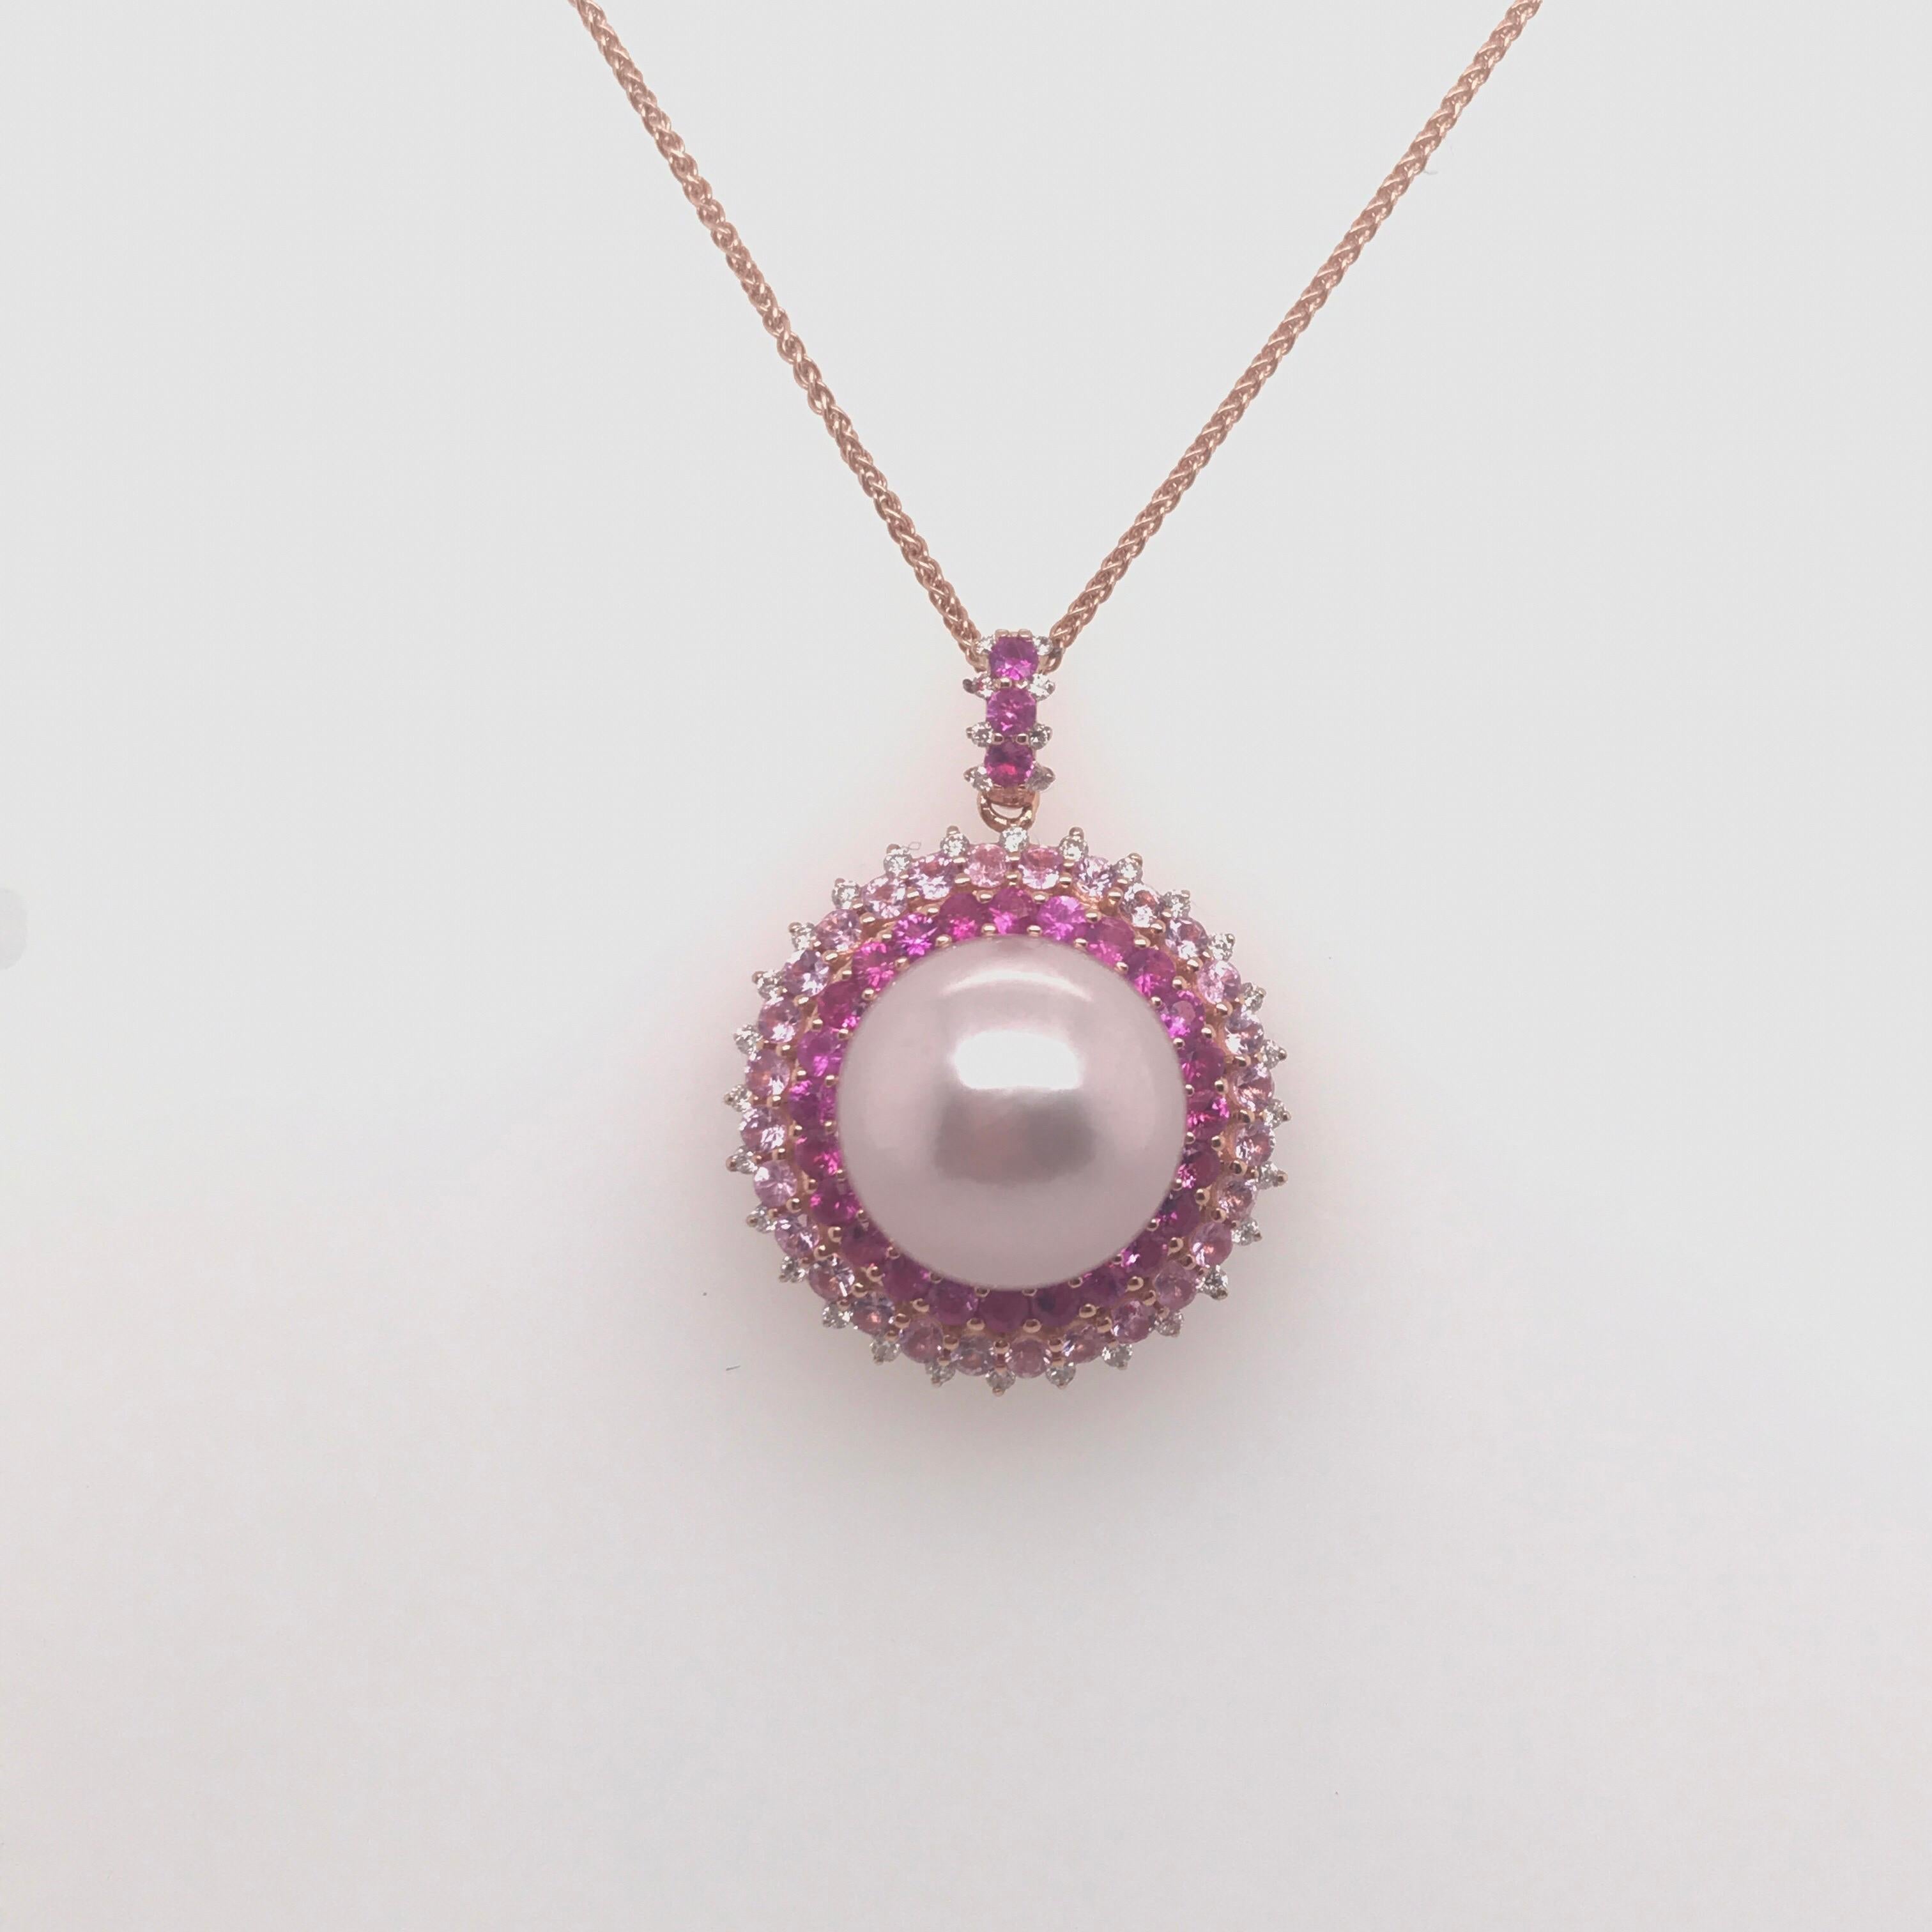 18K Rose Gold pendant necklace featuring one Pink Freshwater pearl measuring 13-14 mm flanked with pink sapphires weighing 1.97 carats and 36 round brilliants weighing 0.22 carats. 